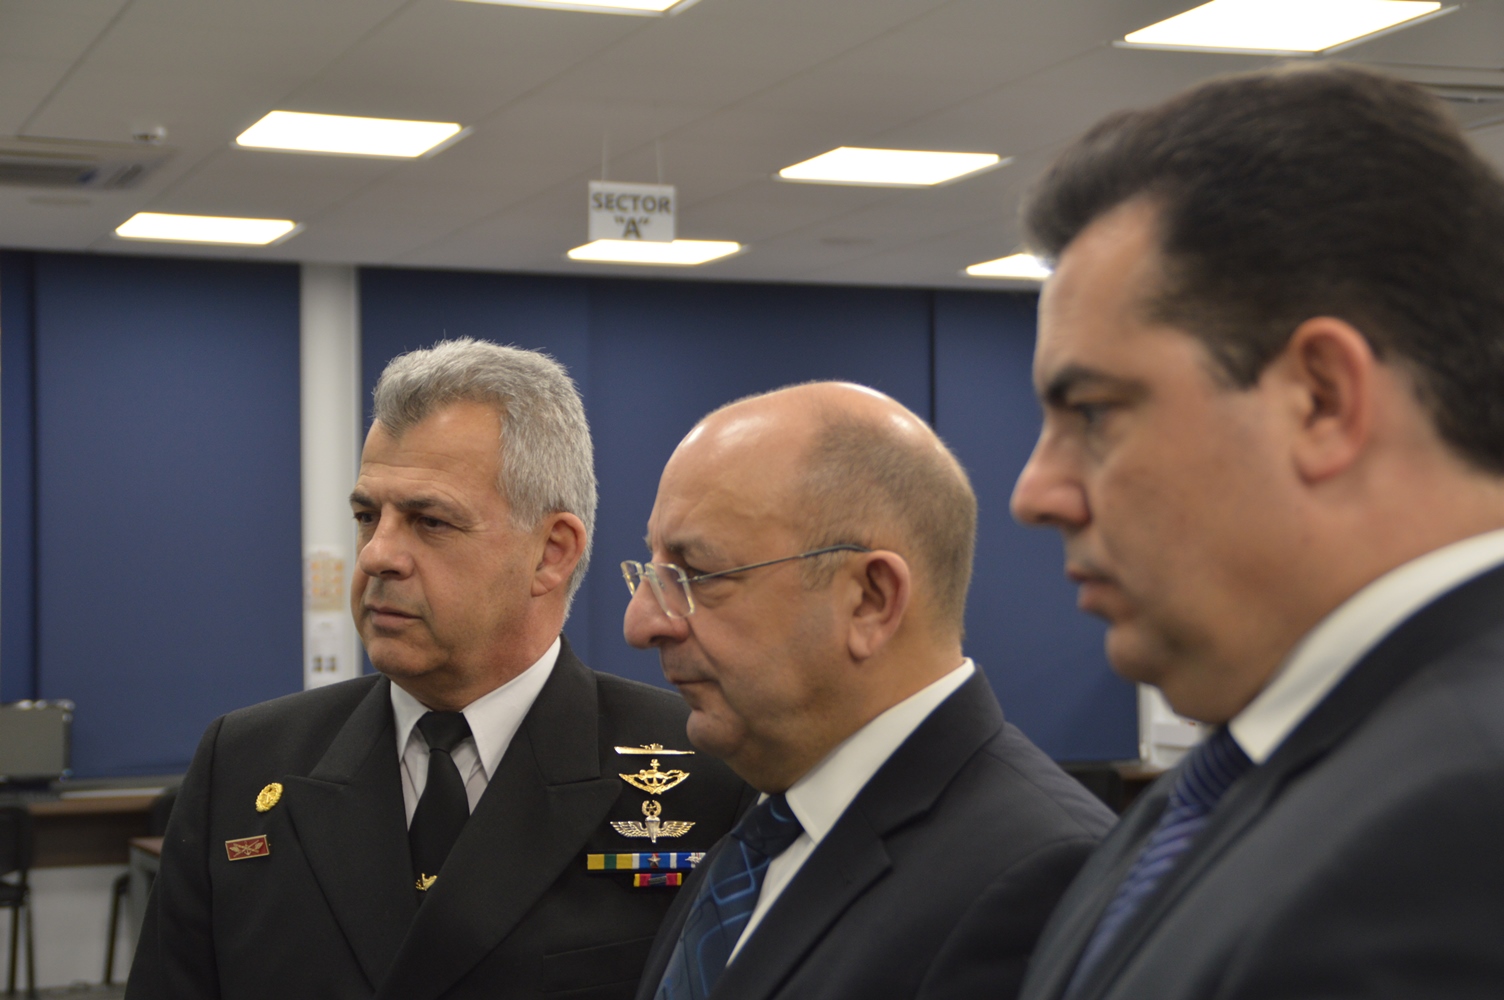 The Minister of Defence of the Republic of Malta, visits the JRCC Larnaca